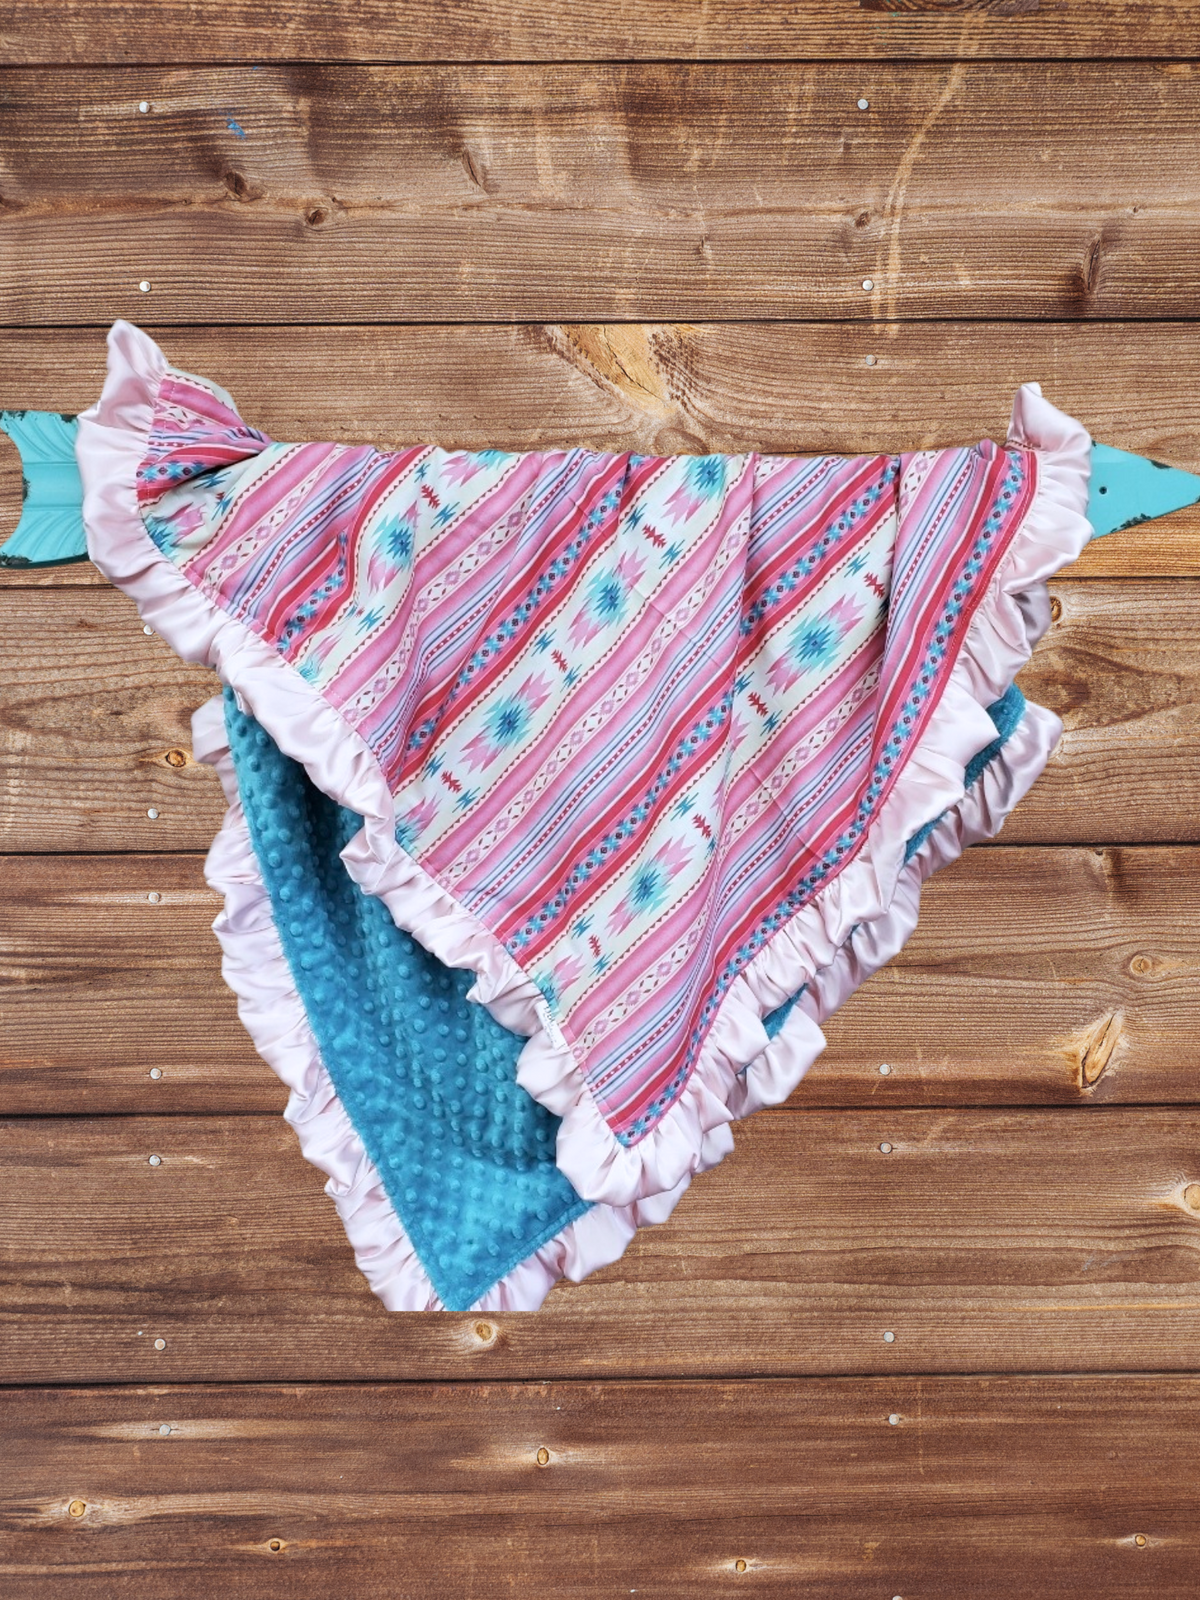 Ruffle Baby Blanket - Pink Aztec and Teal Minky Western Blanket - DBC Baby Bedding Co 